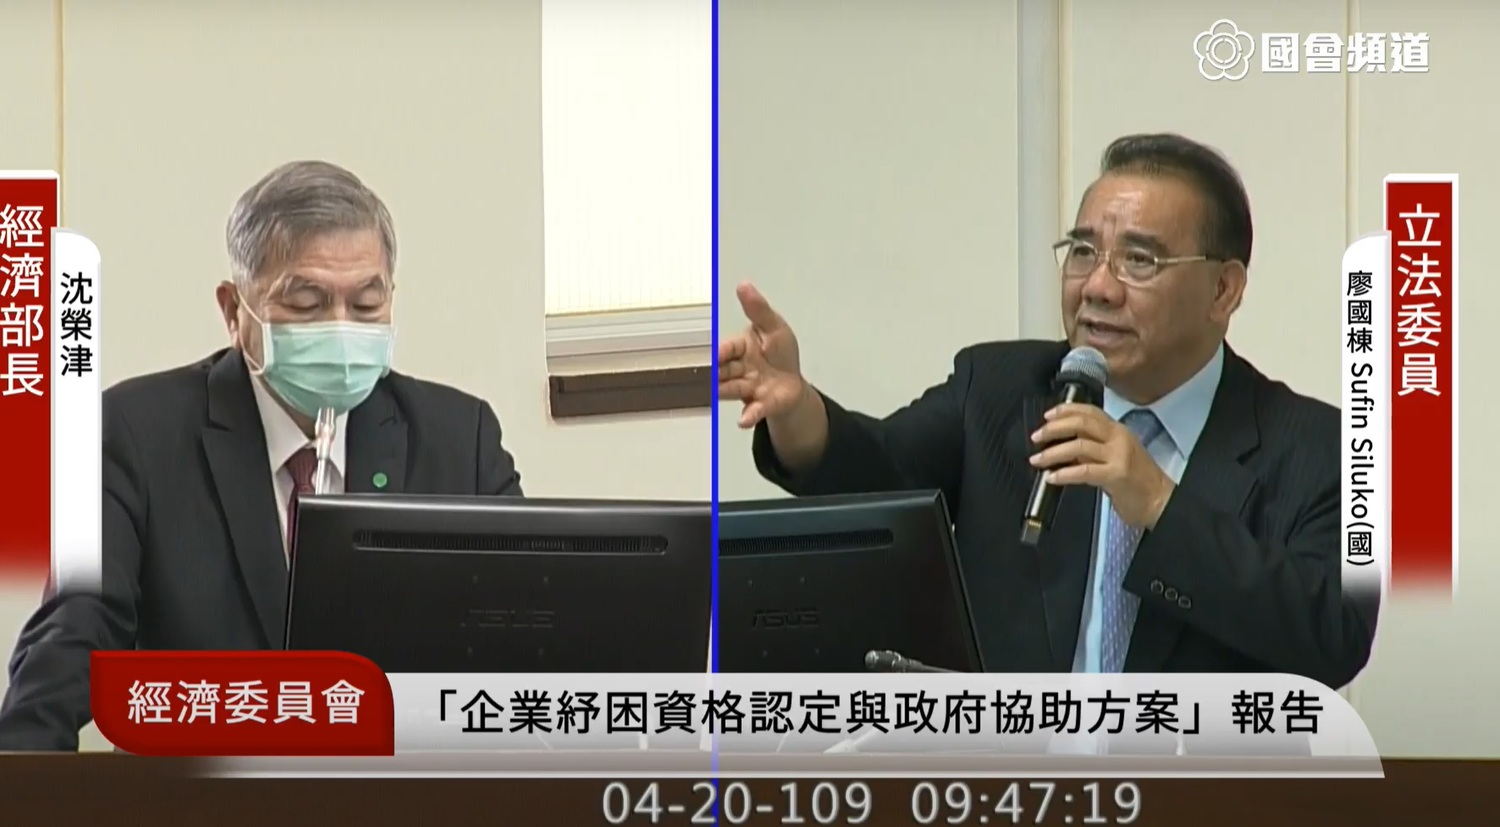 During the question period, KMT legislator Liao Guodong asked the economy minister, Shen Rongjin, not to answer questions in Taiwanese. Image: Recovered from the Congress Channel